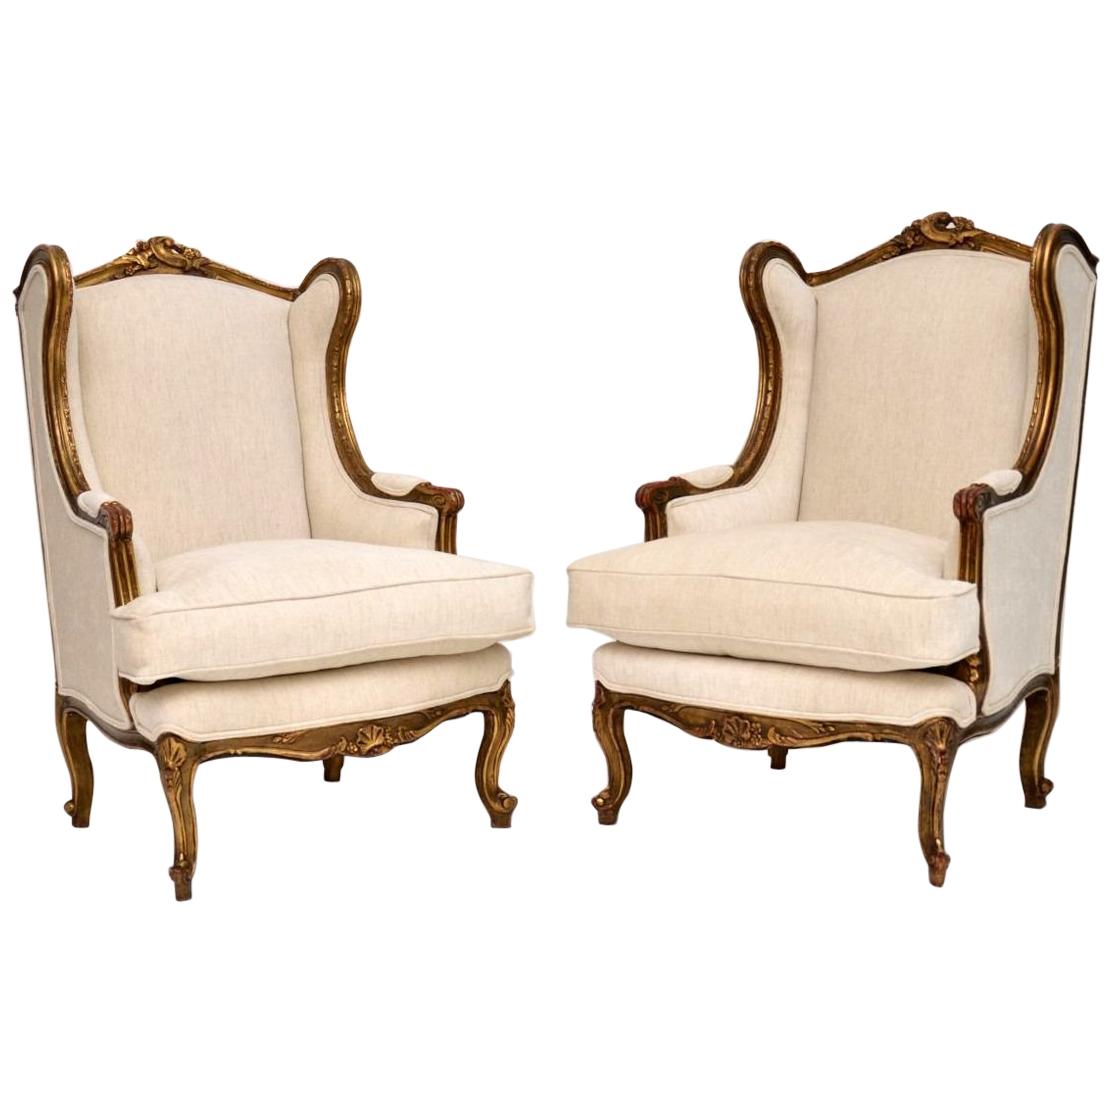 Pair of Antique French Giltwood Wingback Armchairs